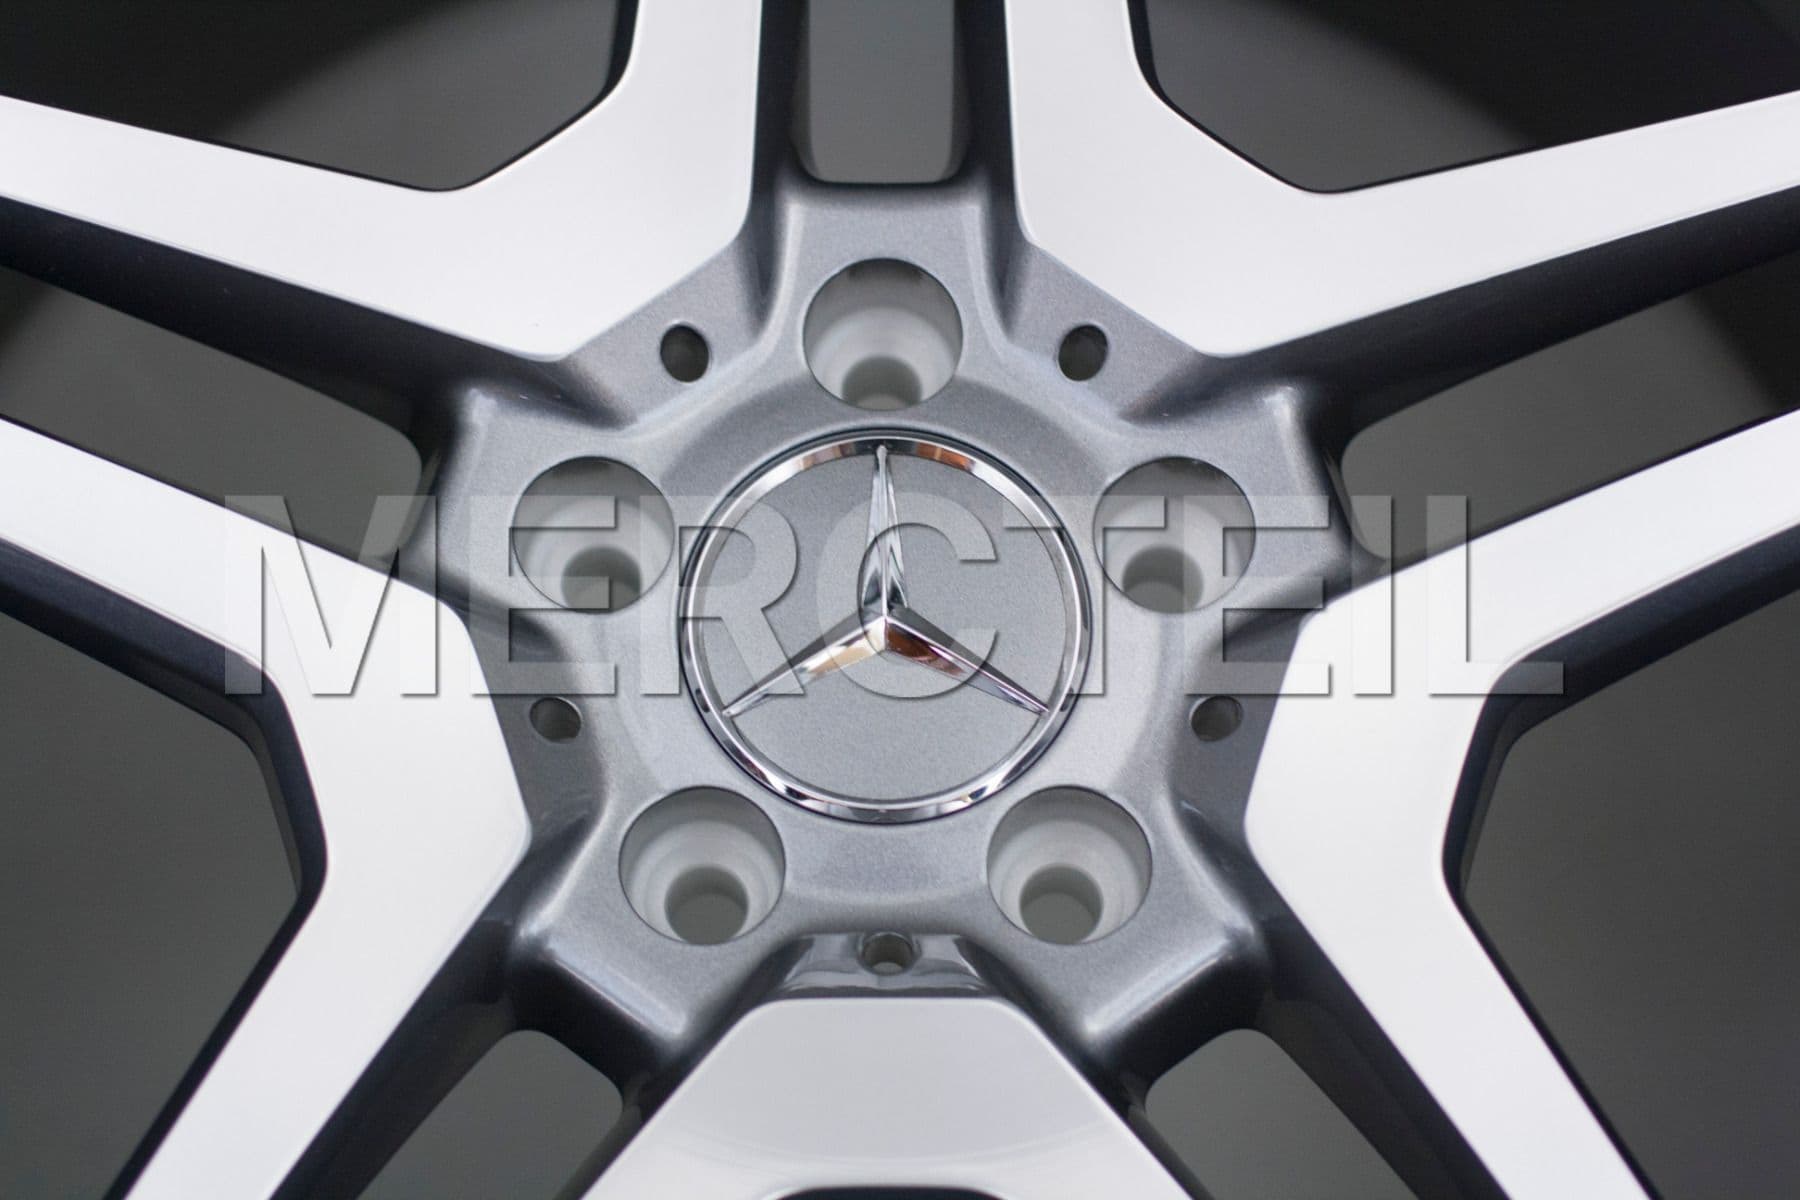 AMG 20 Inch Set Of Forged Grey Wheel for S Class W221, CL Class C216 Part Number B66031380, 66031380.